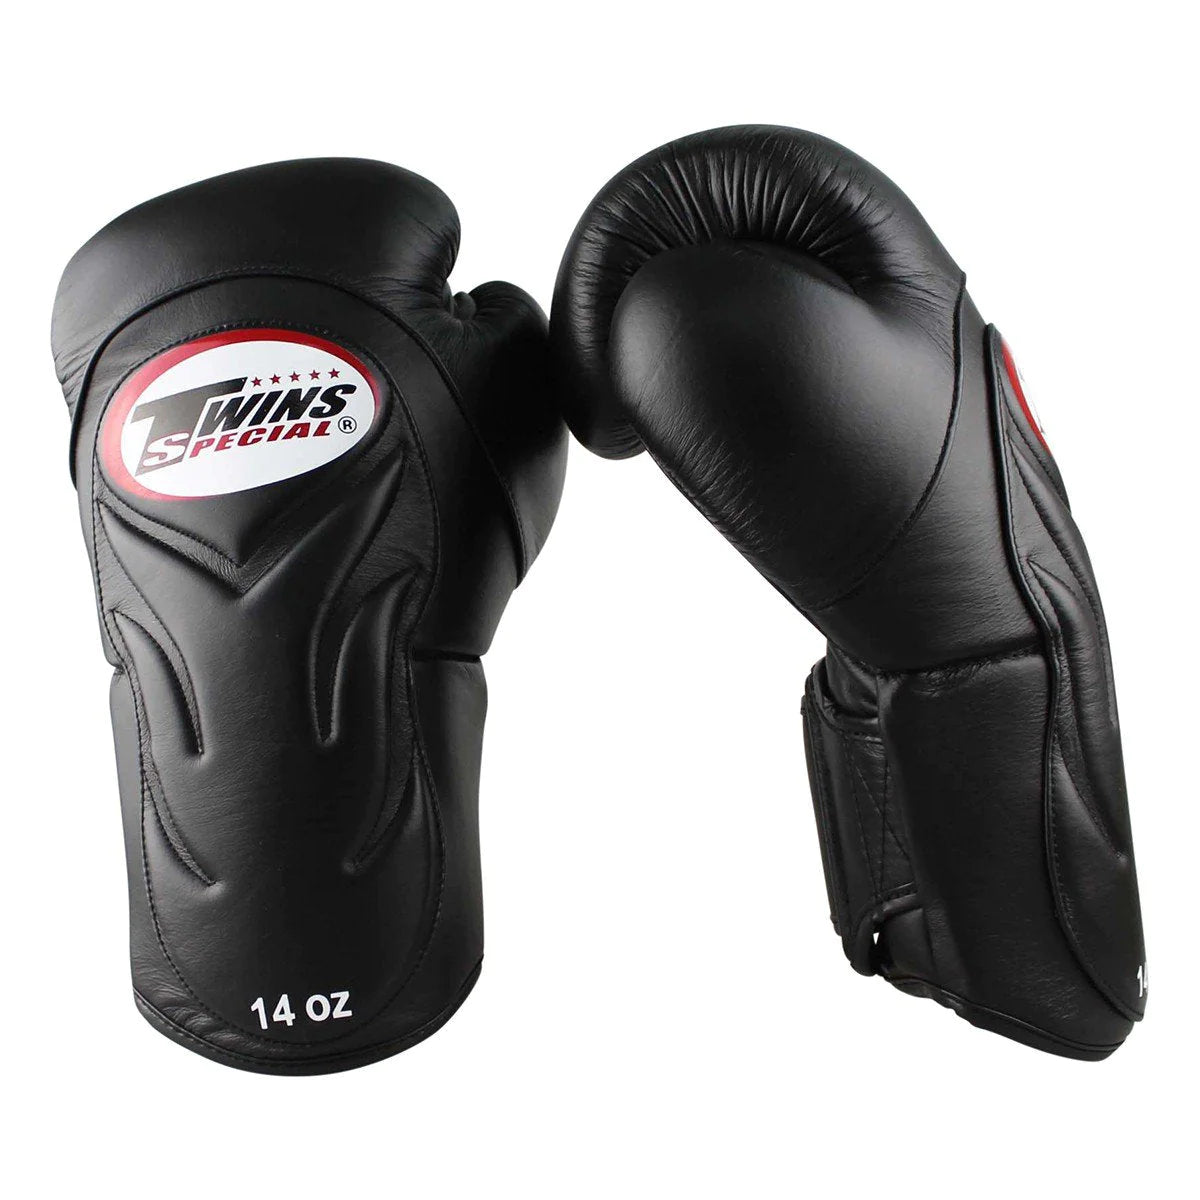 Twins Special BGVL6 BLACK BOXING GLOVES